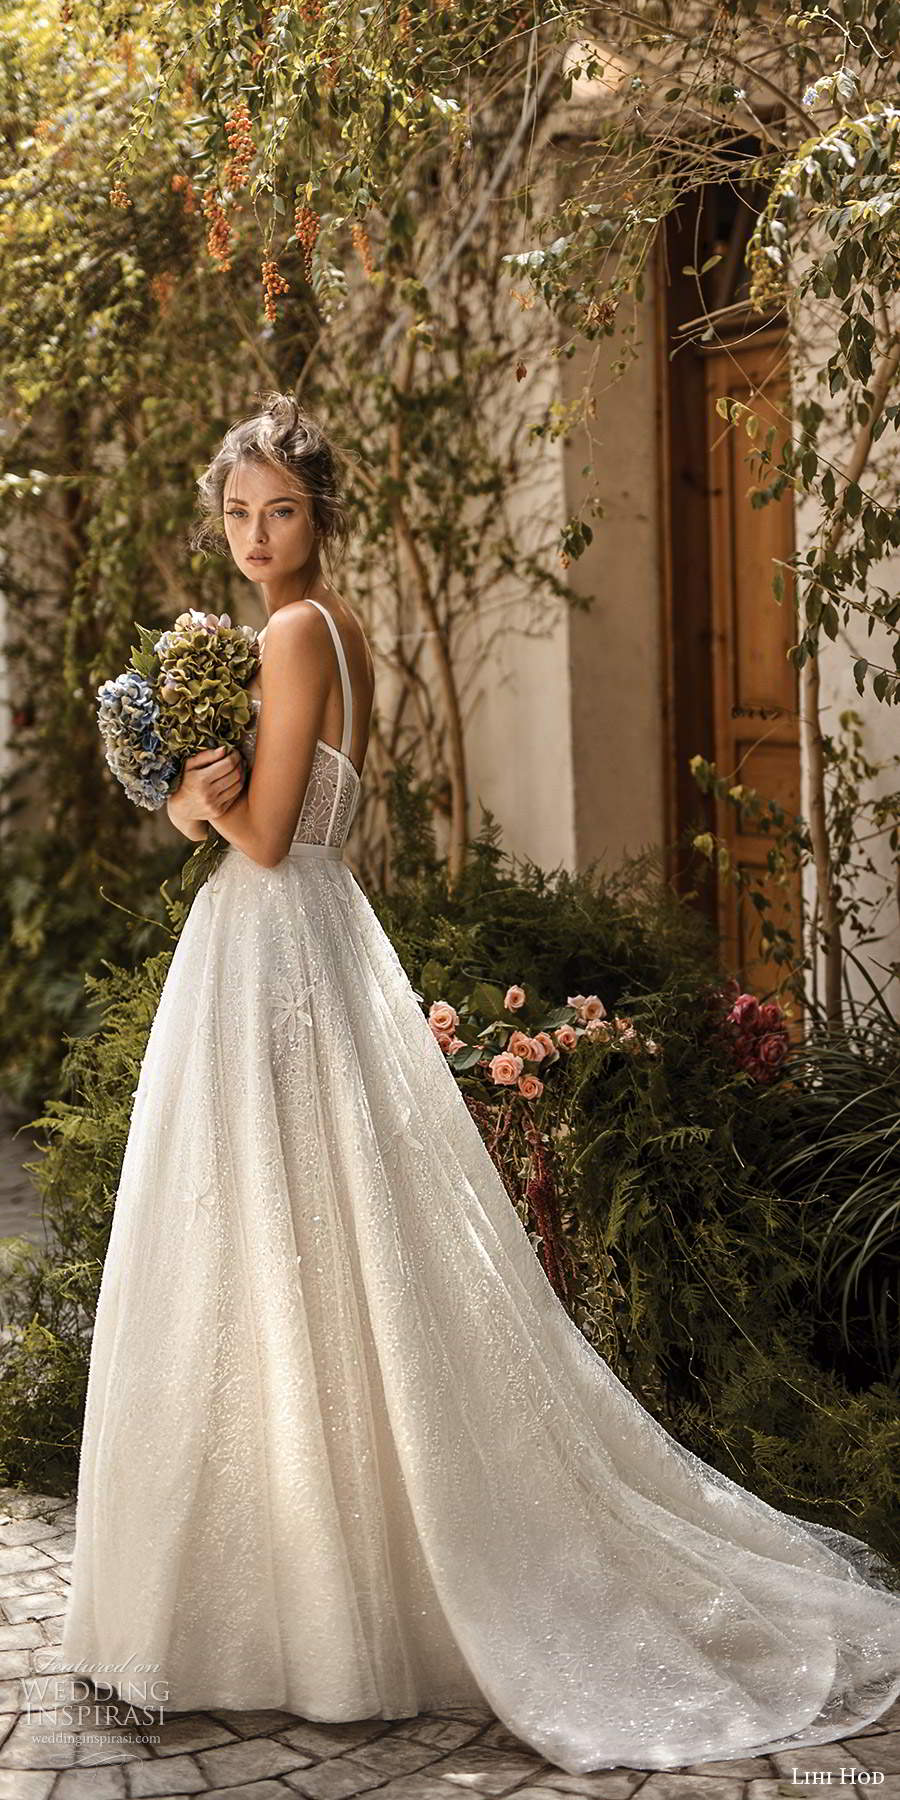 lihi hod fall 2020 bridal sleeveless straps sweetheart neckline sheer bodice fully embellished lace a line ball gown wedding dress chapel train (1) sv